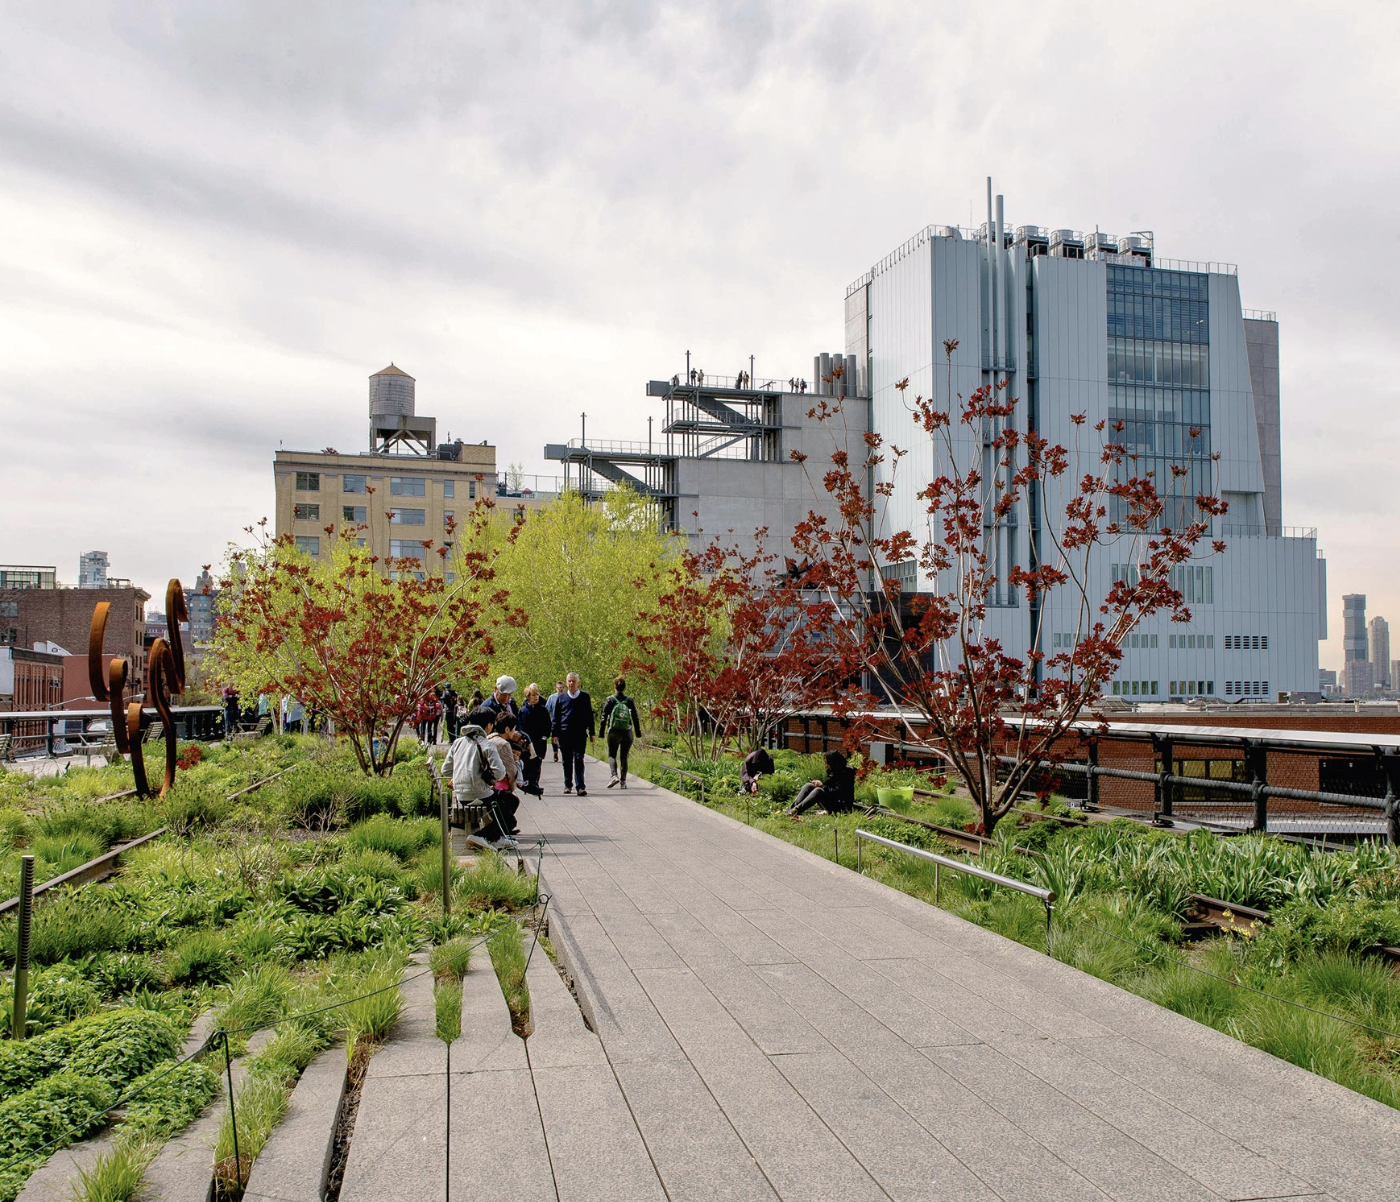 Wander down the High Line